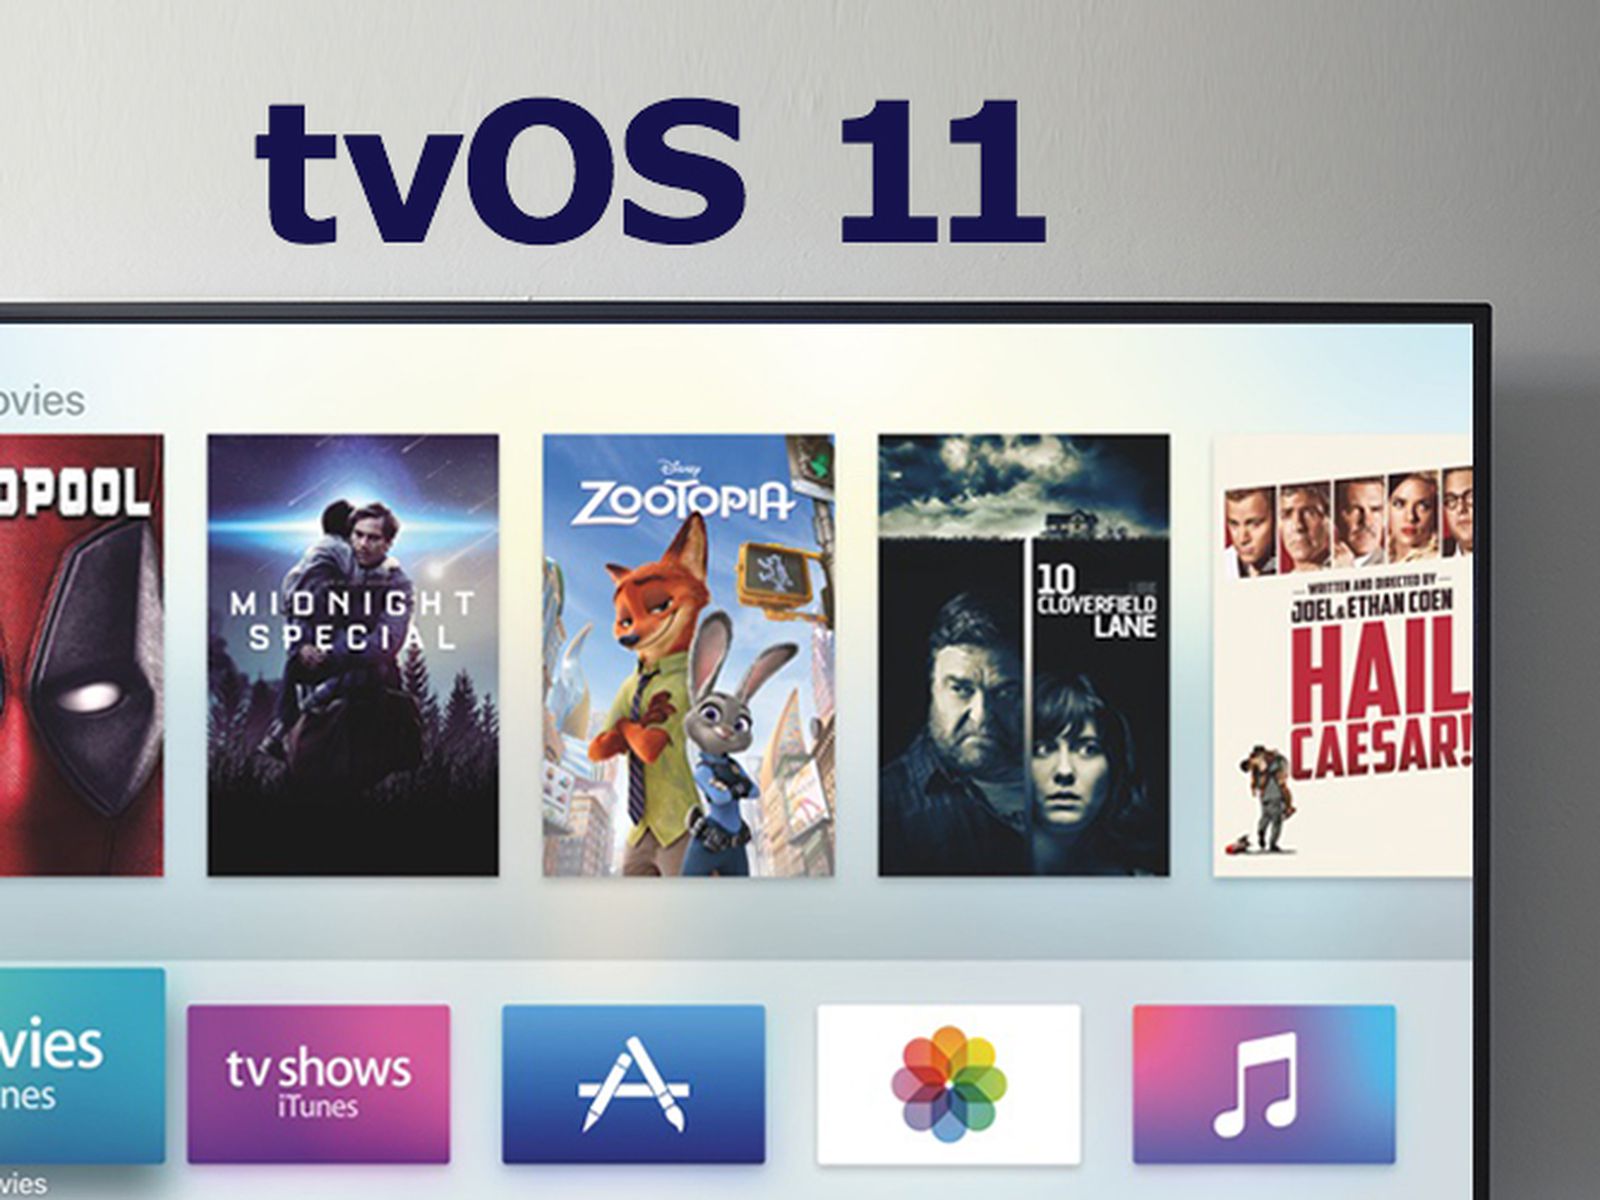 Legende metodologi høste Apple Releases tvOS 11 With Home Screen Syncing, Auto Dark Mode, and 4K  Support for New Apple TV - MacRumors